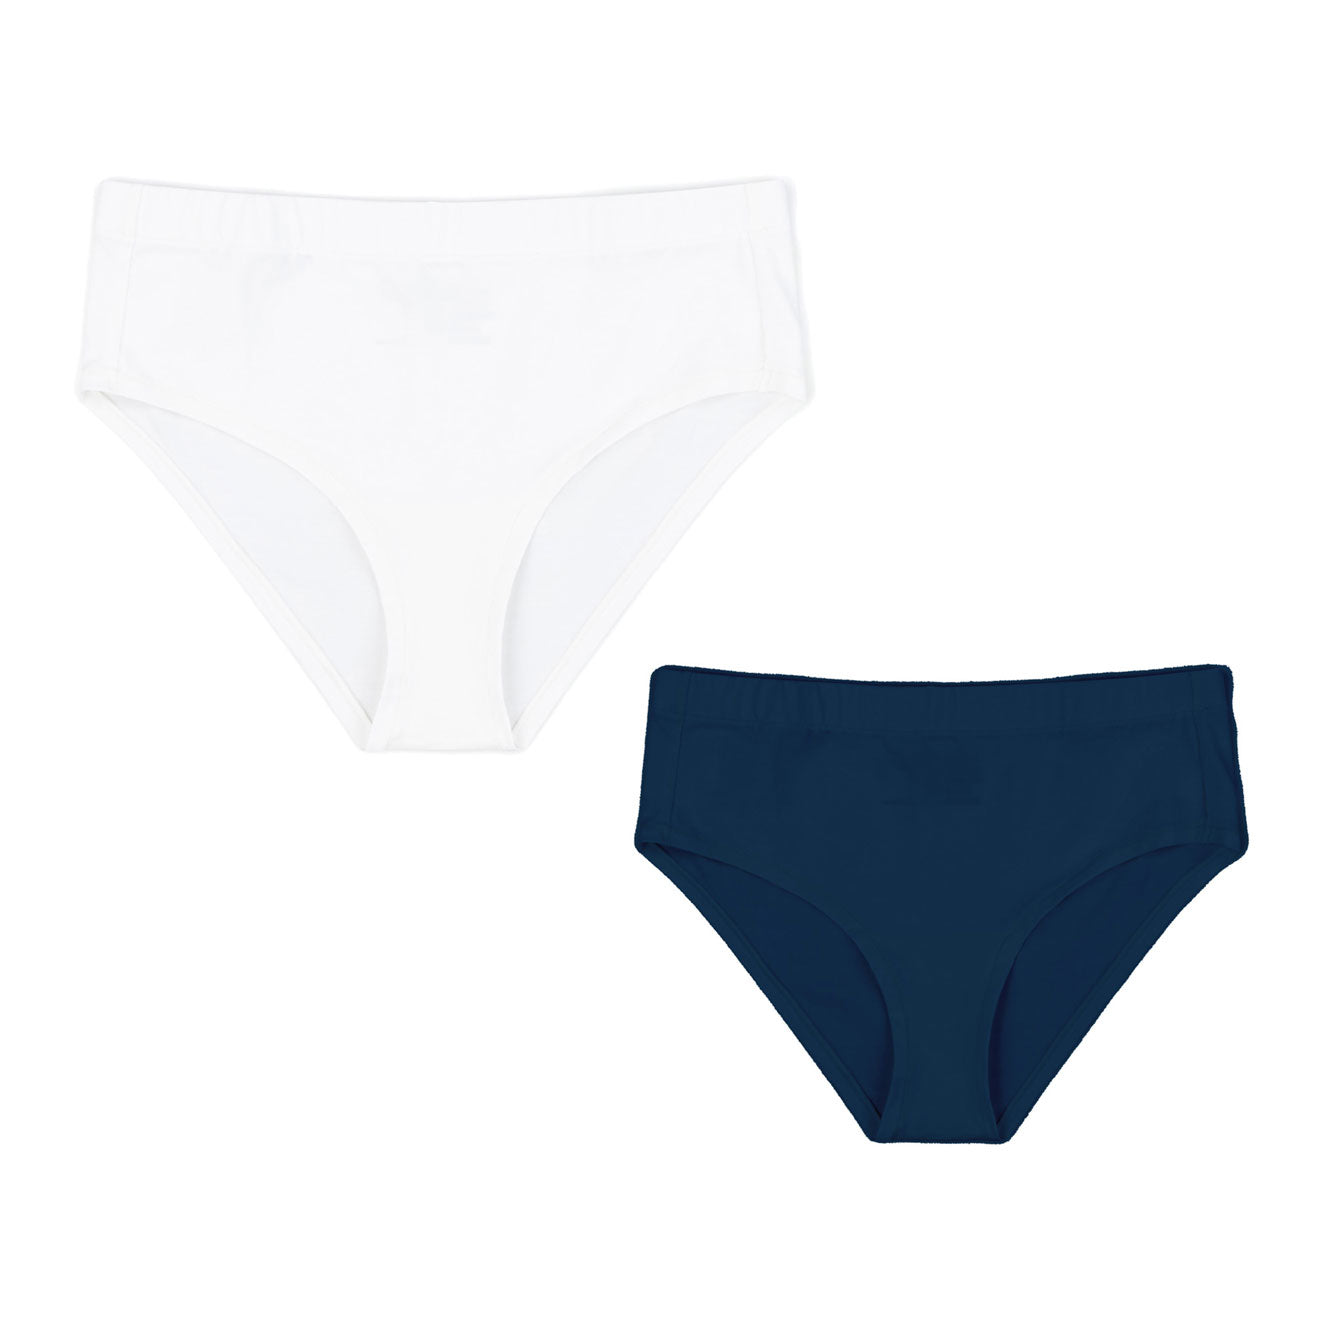 high rise brief in navy and white, organic everyday basic underwear